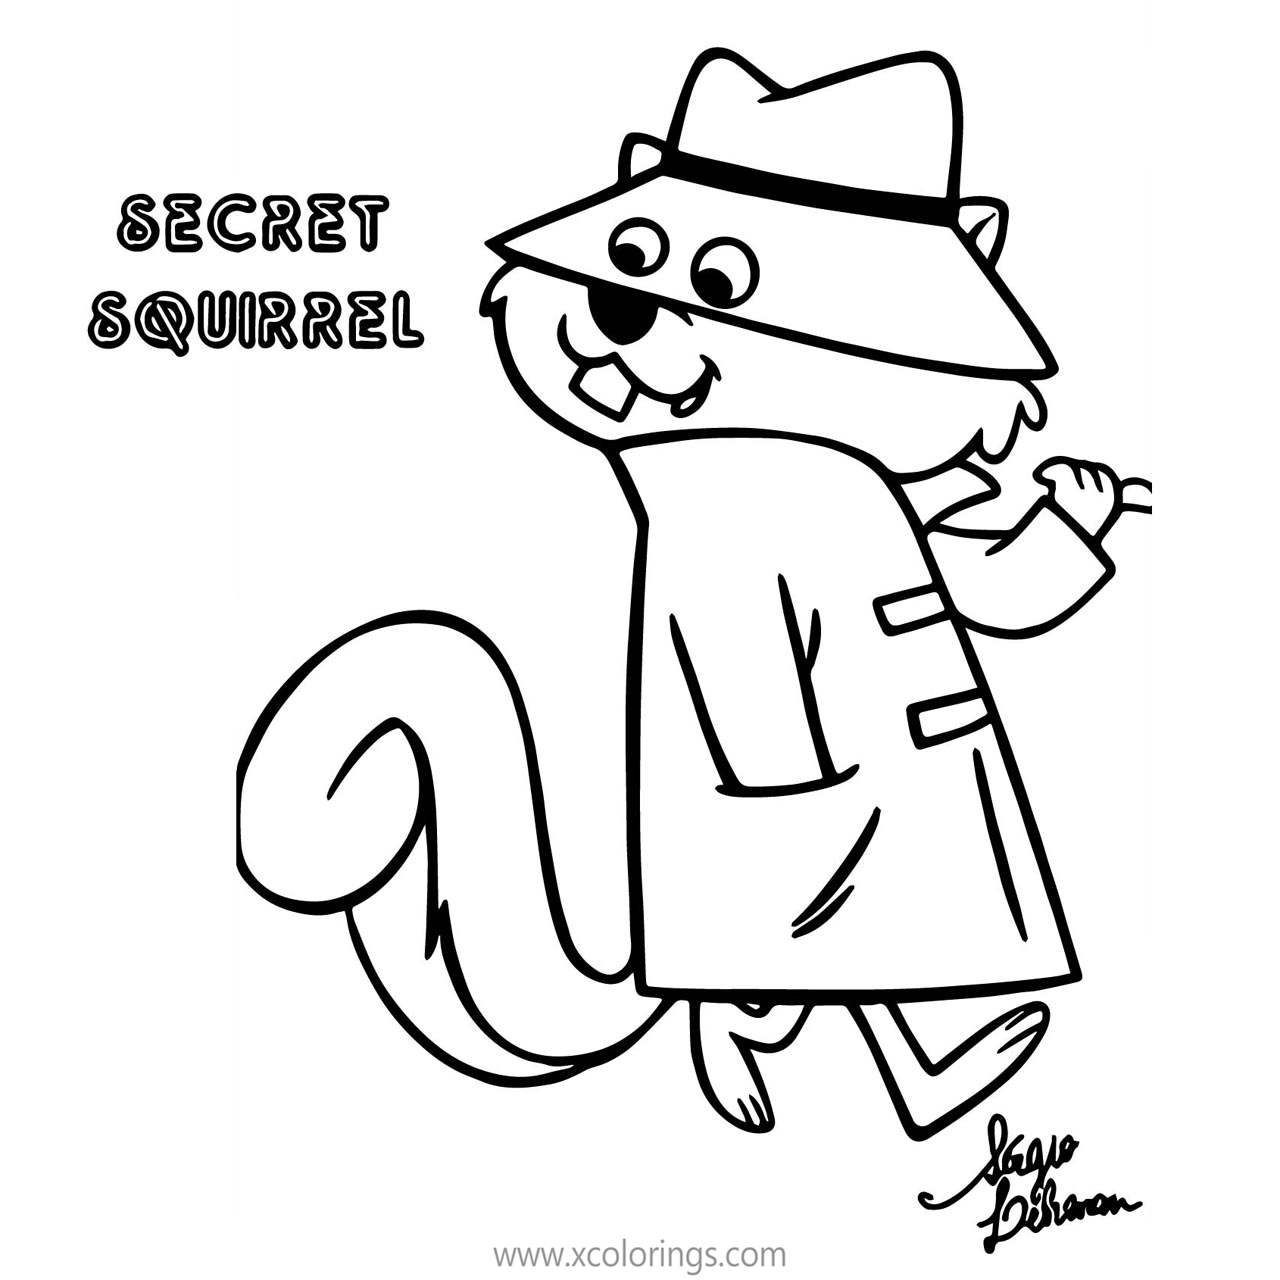 Free Secret Squirrel Goes to Work Coloring Page printable